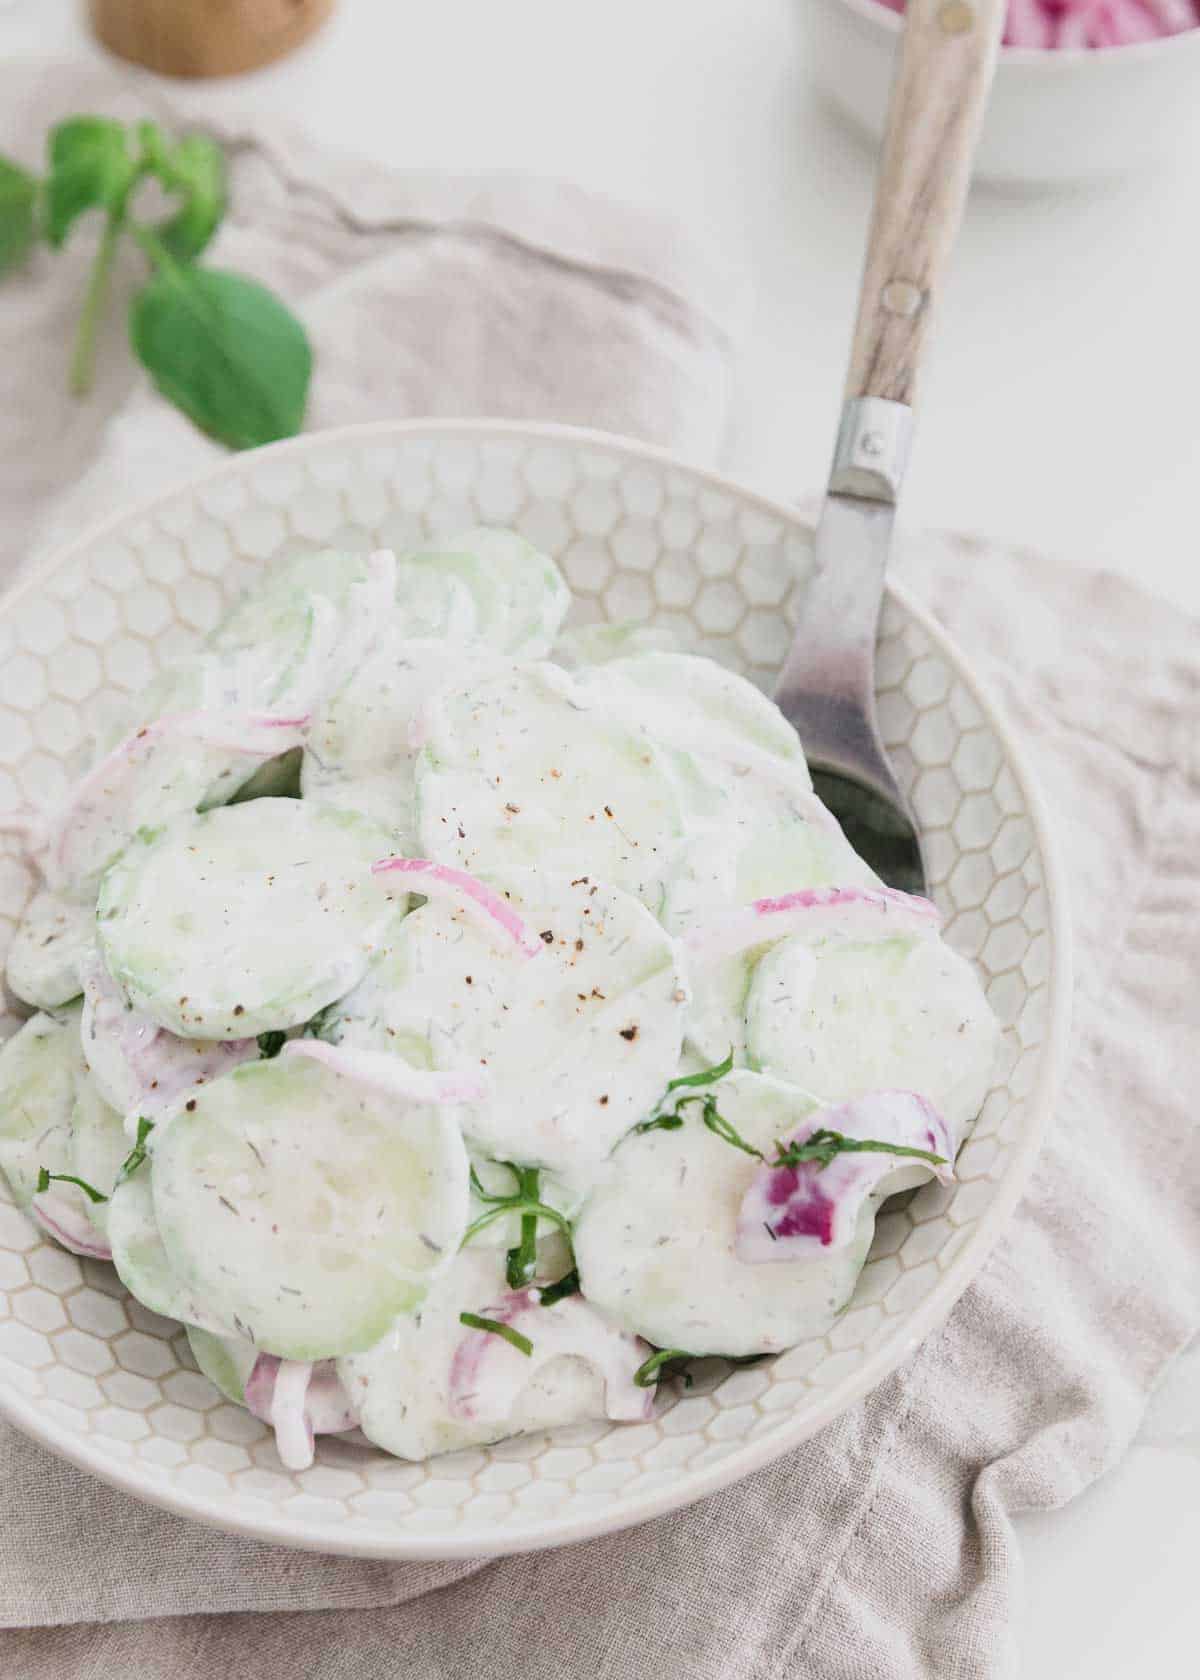 A healthier twist to the classic creamy cucumber salad recipe with quick pickled red onions. The perfect summer salad for any cookout!